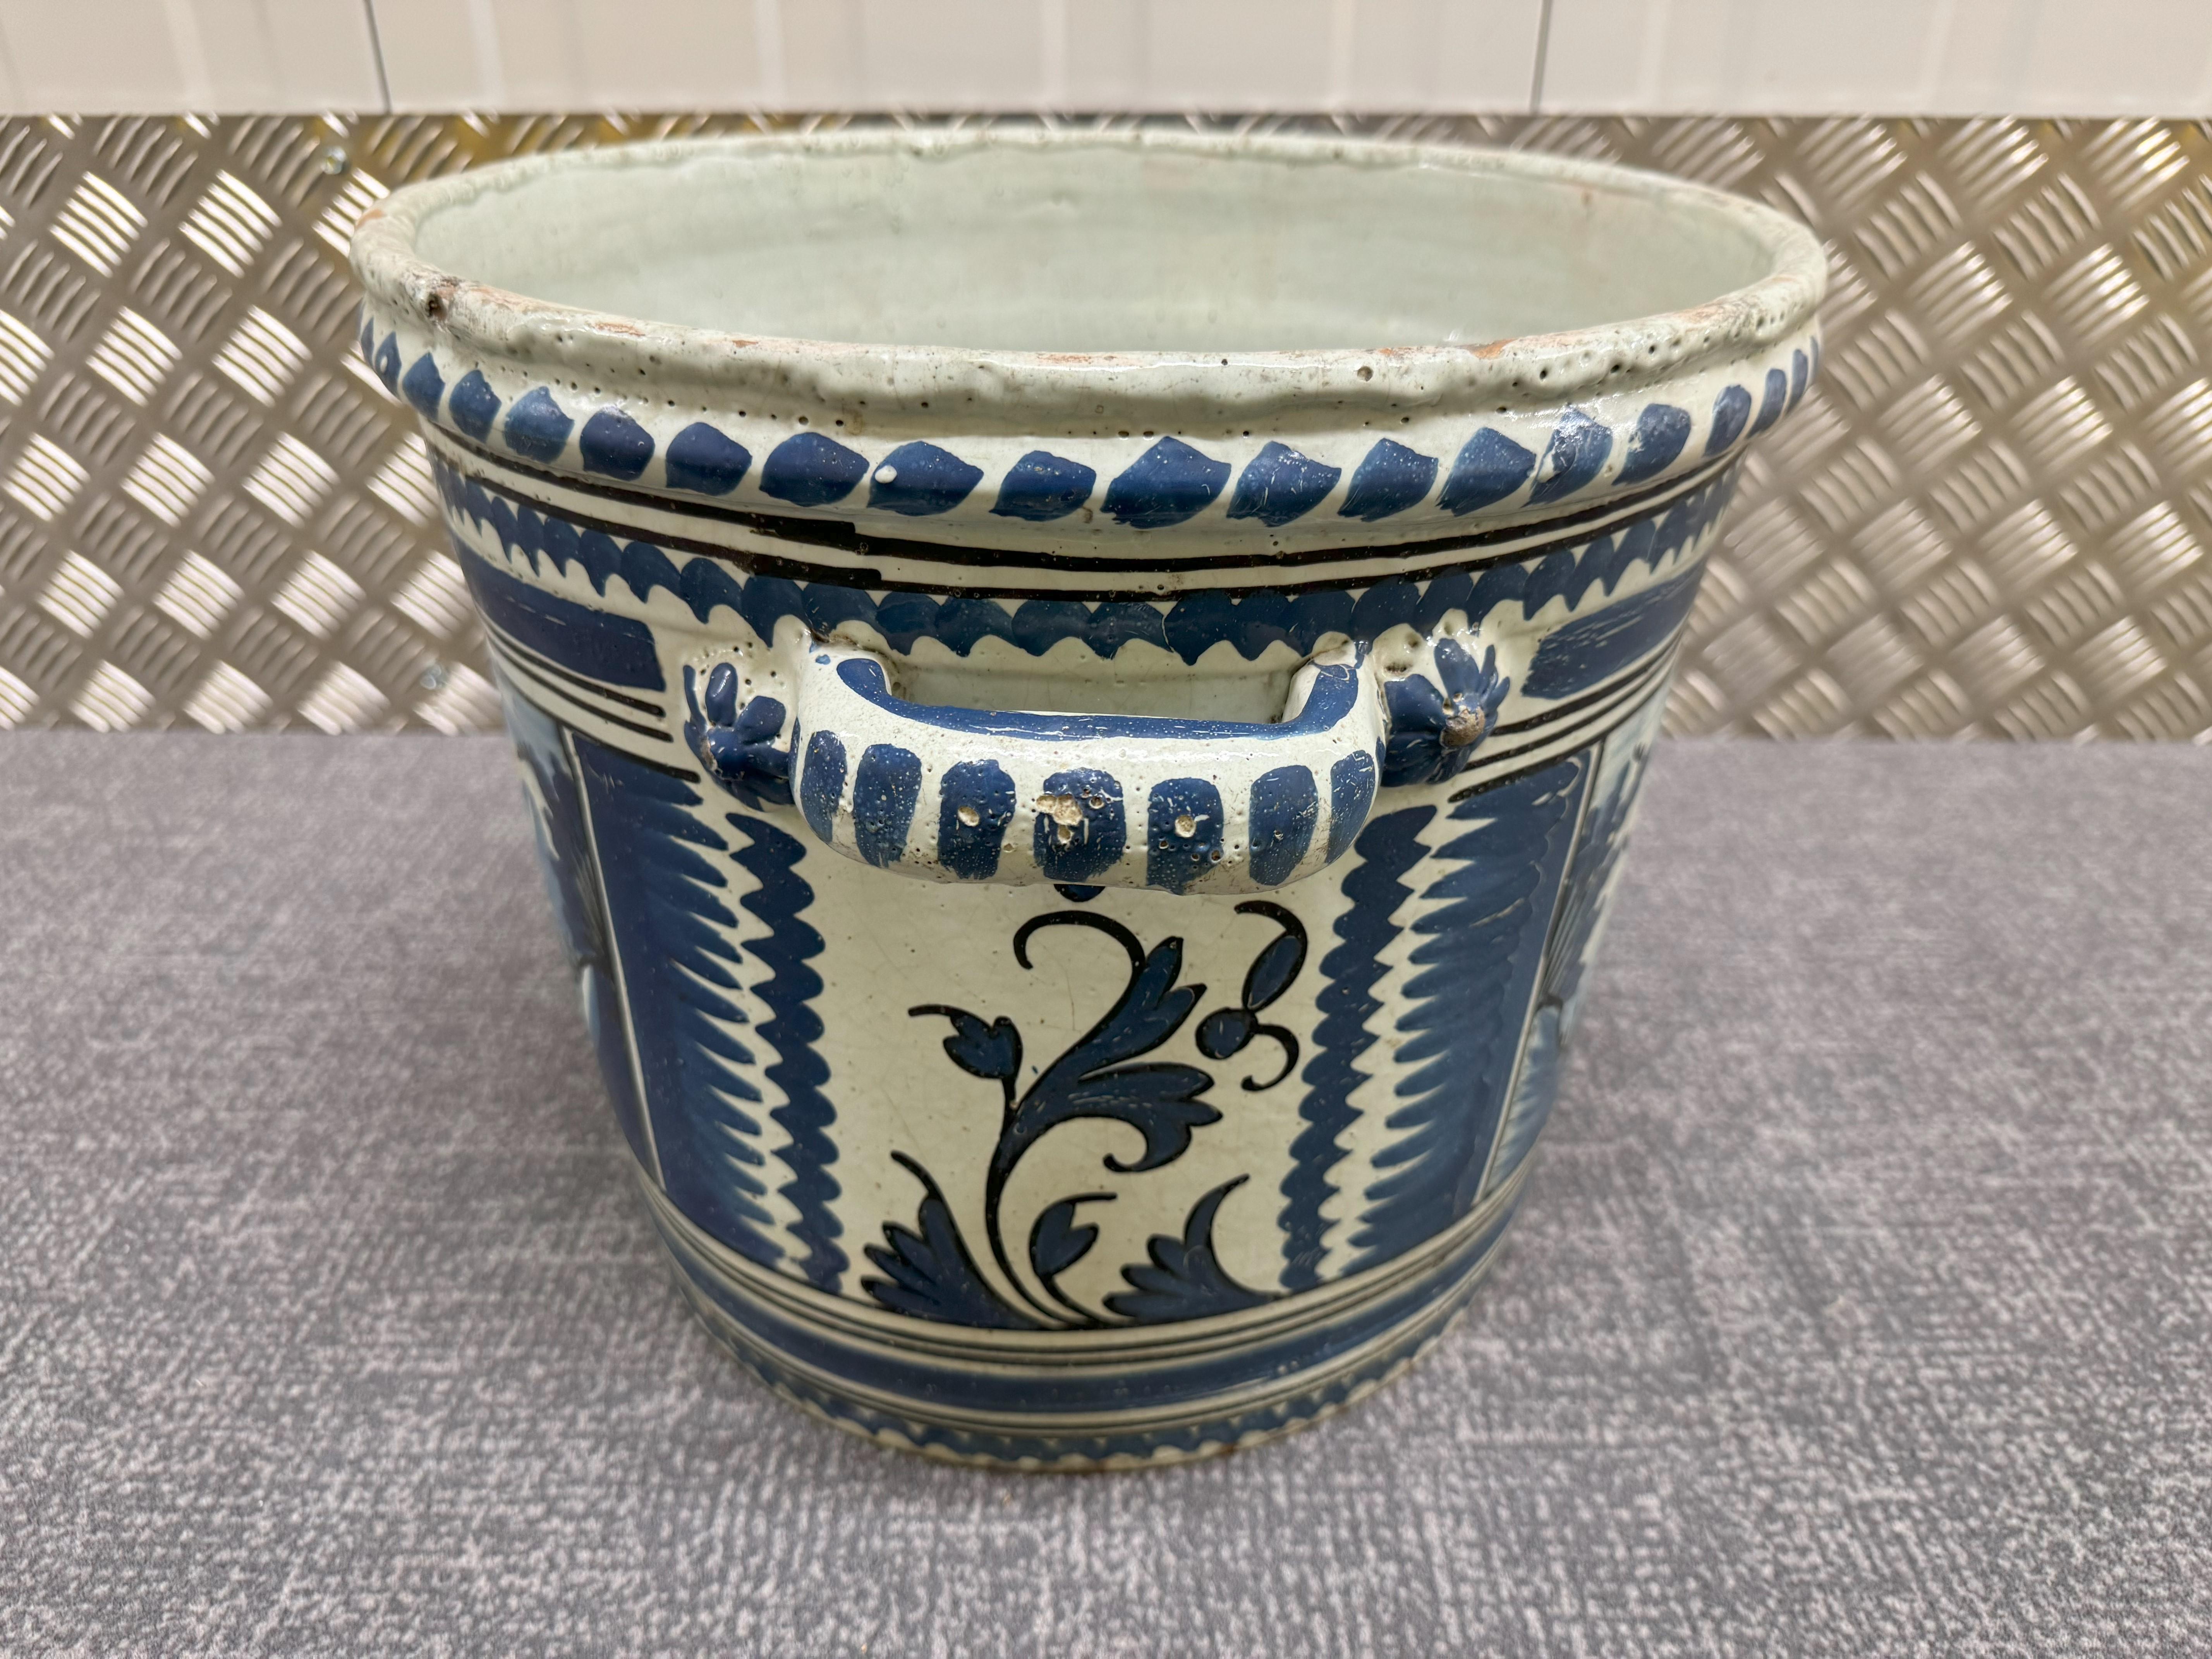 Nevers Faience 'Pot a Oranger' adorned with painted Asian house scene and a flowered decoration in shades of blue (camaieu bleu). Circa 1750 tin-glazed planter, unusually large size and with two handles.

